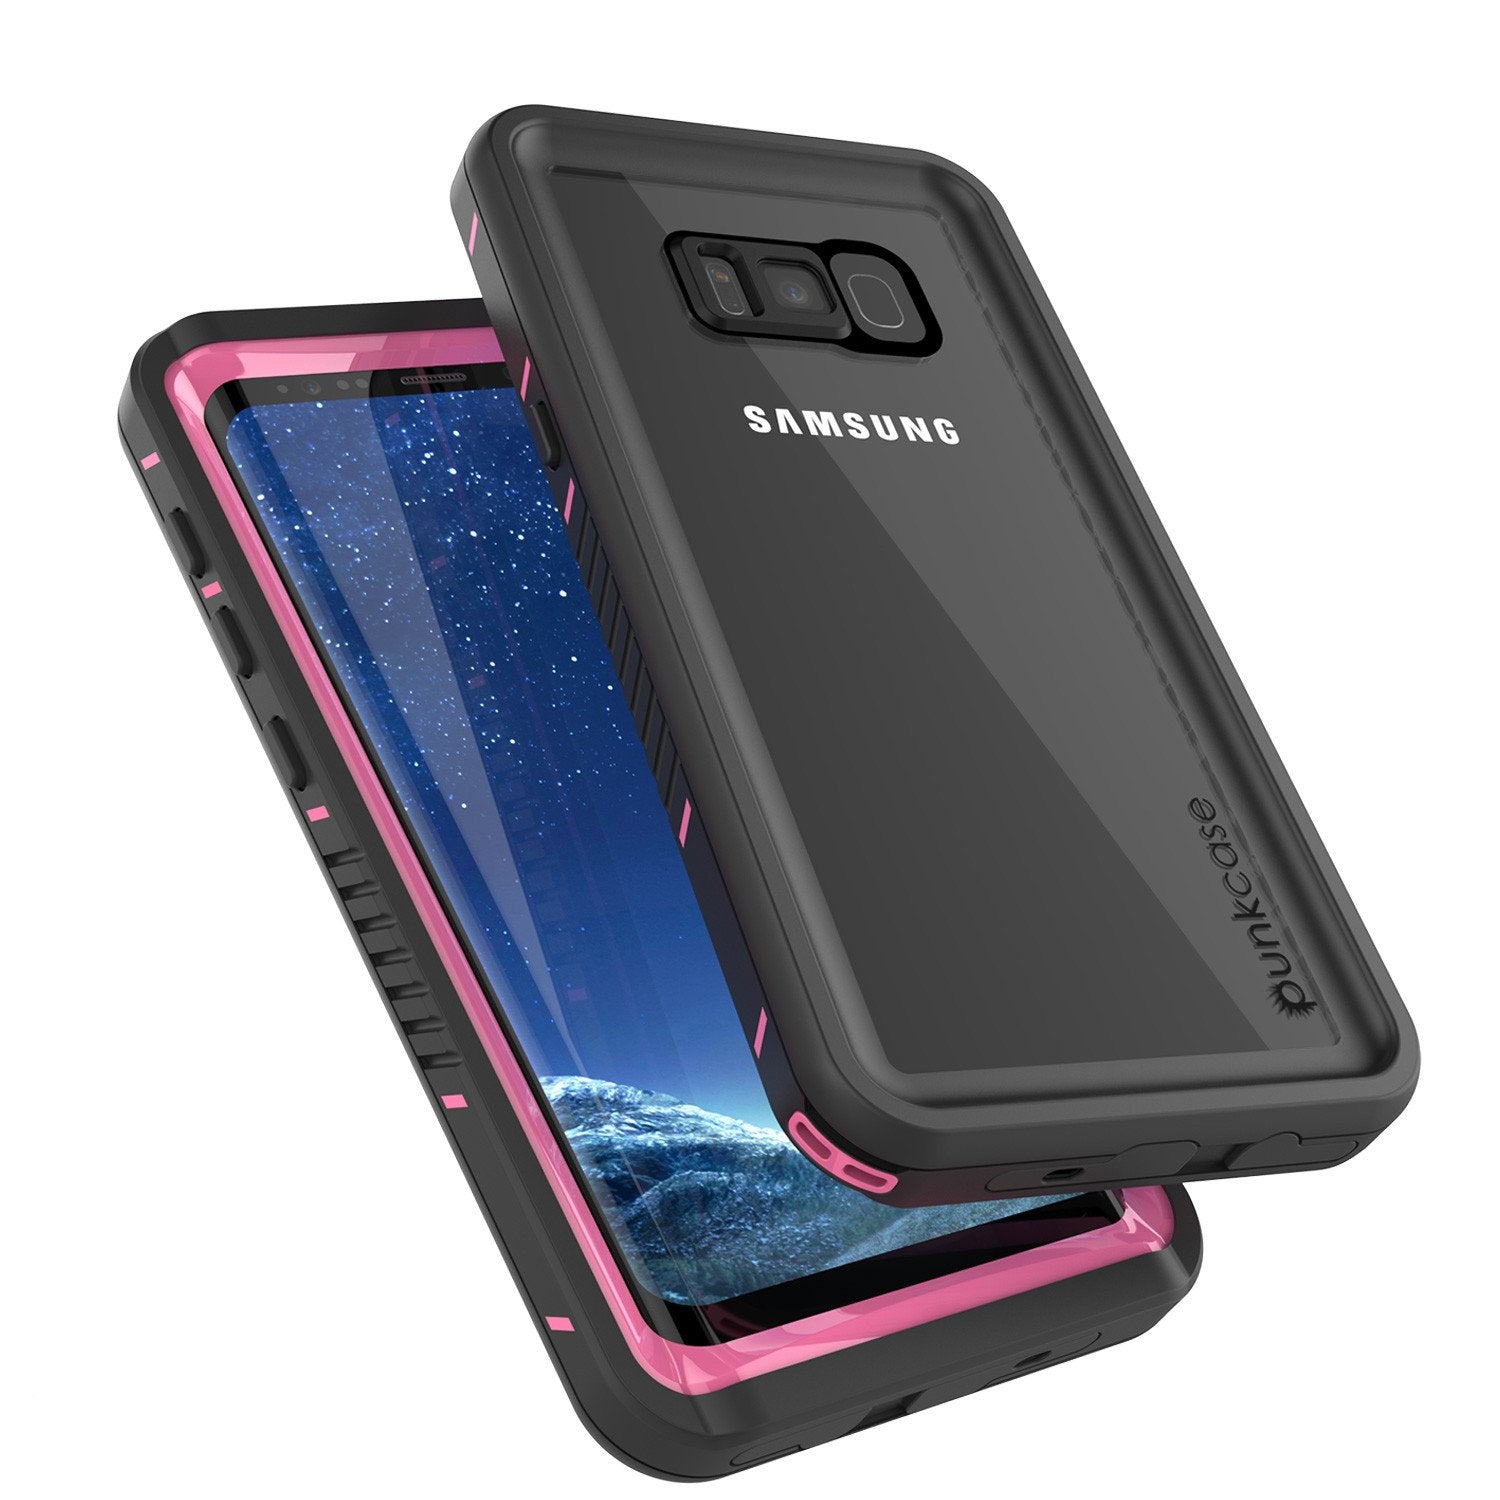 Galaxy S8 Case, Punkcase [Extreme Series] Armor Pink Cover